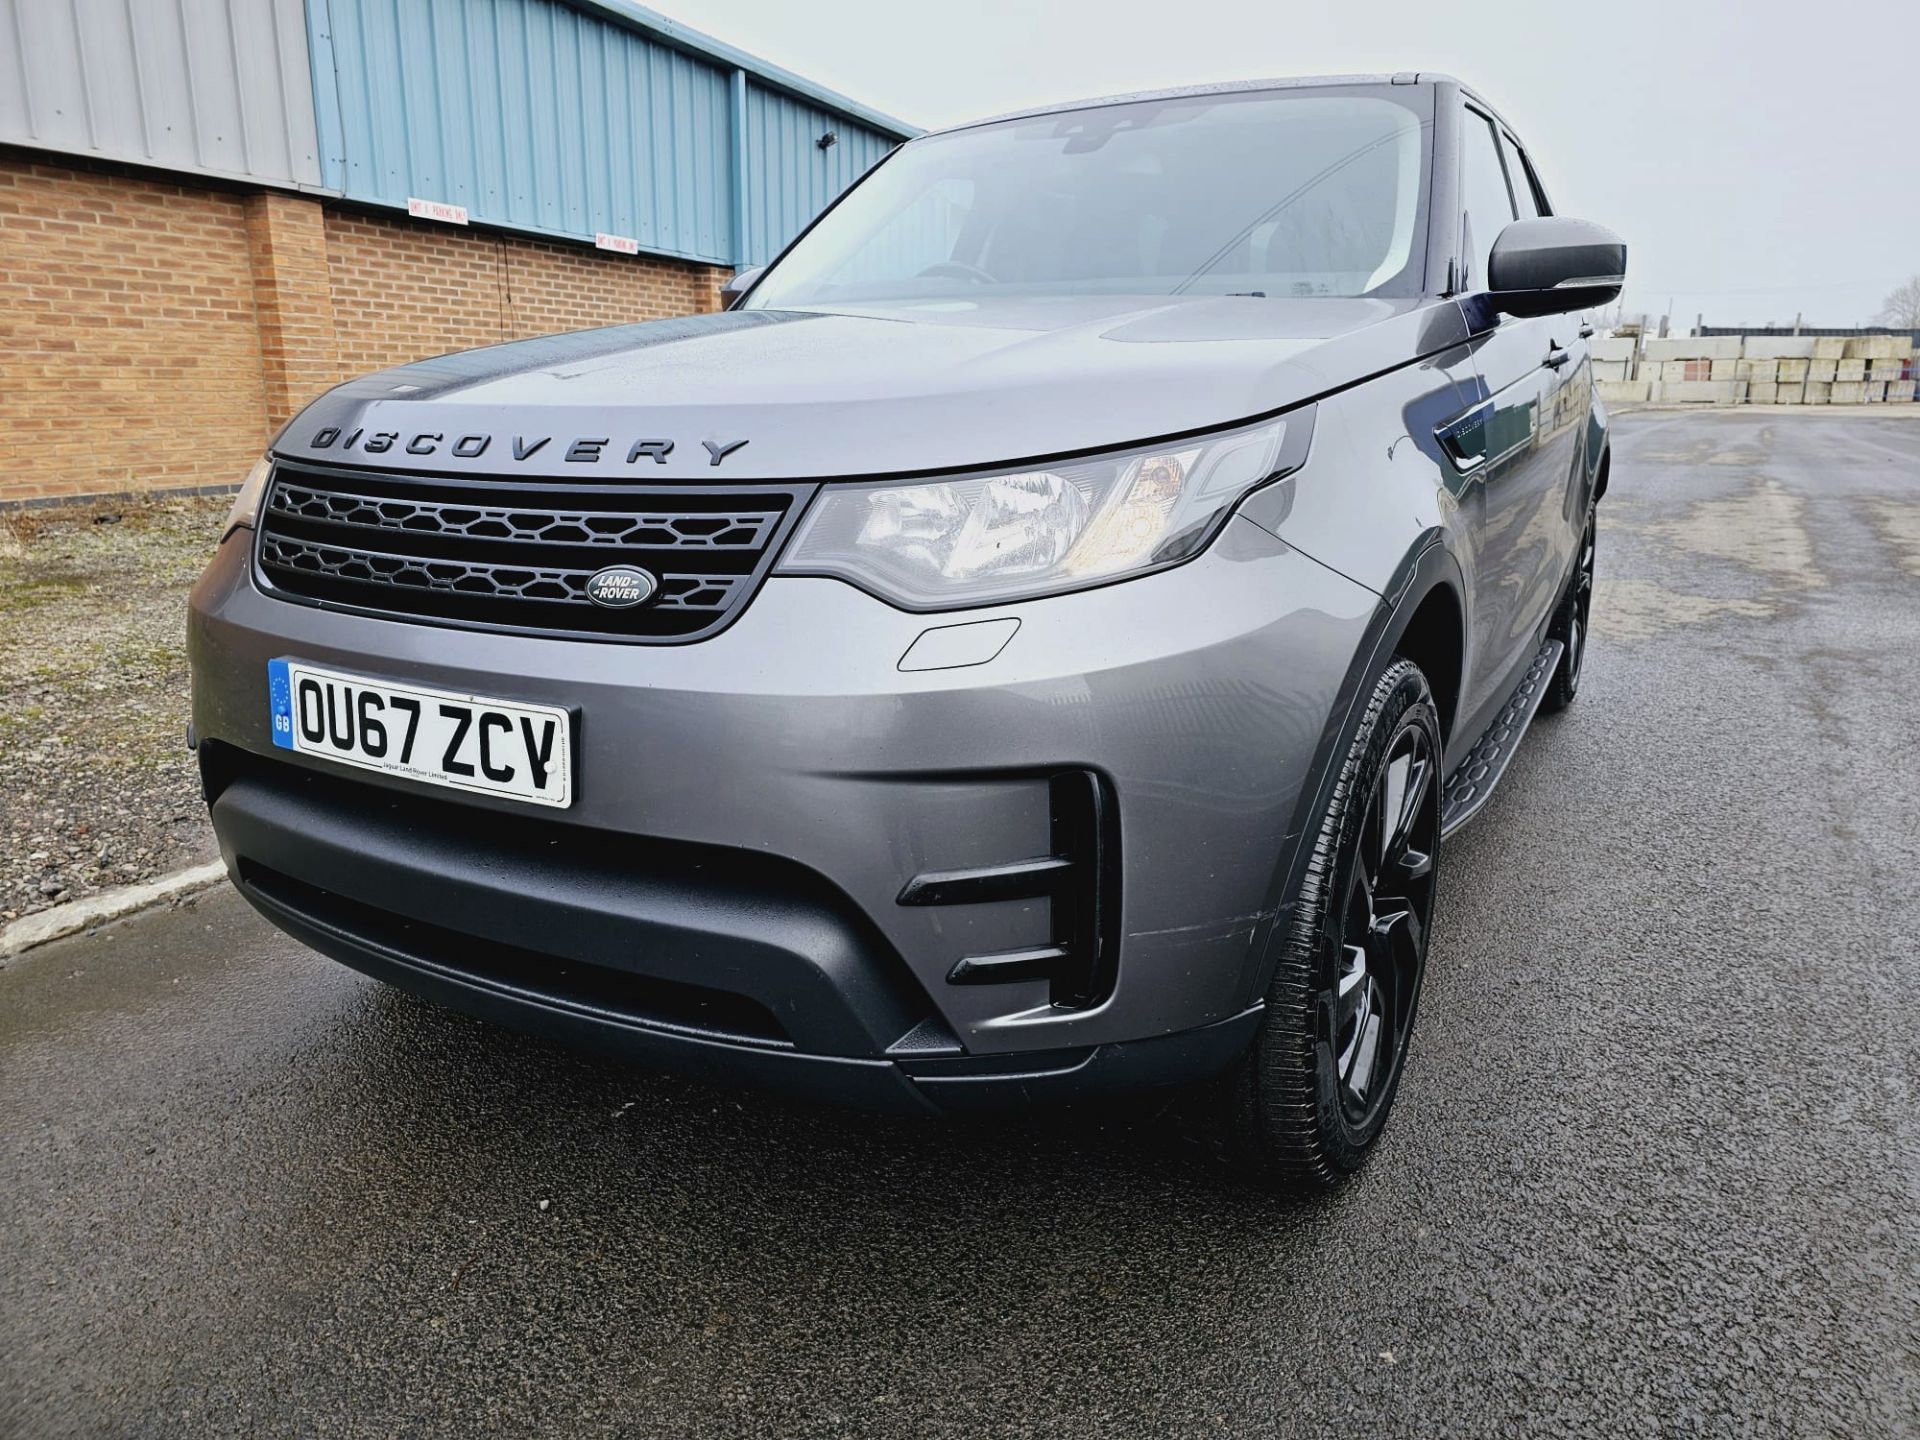 Land Rover Discovery 5 - (New Model) Diesel Auto - 2018 Model - Black Pack Edition - Sat Nav - Look - Image 6 of 45